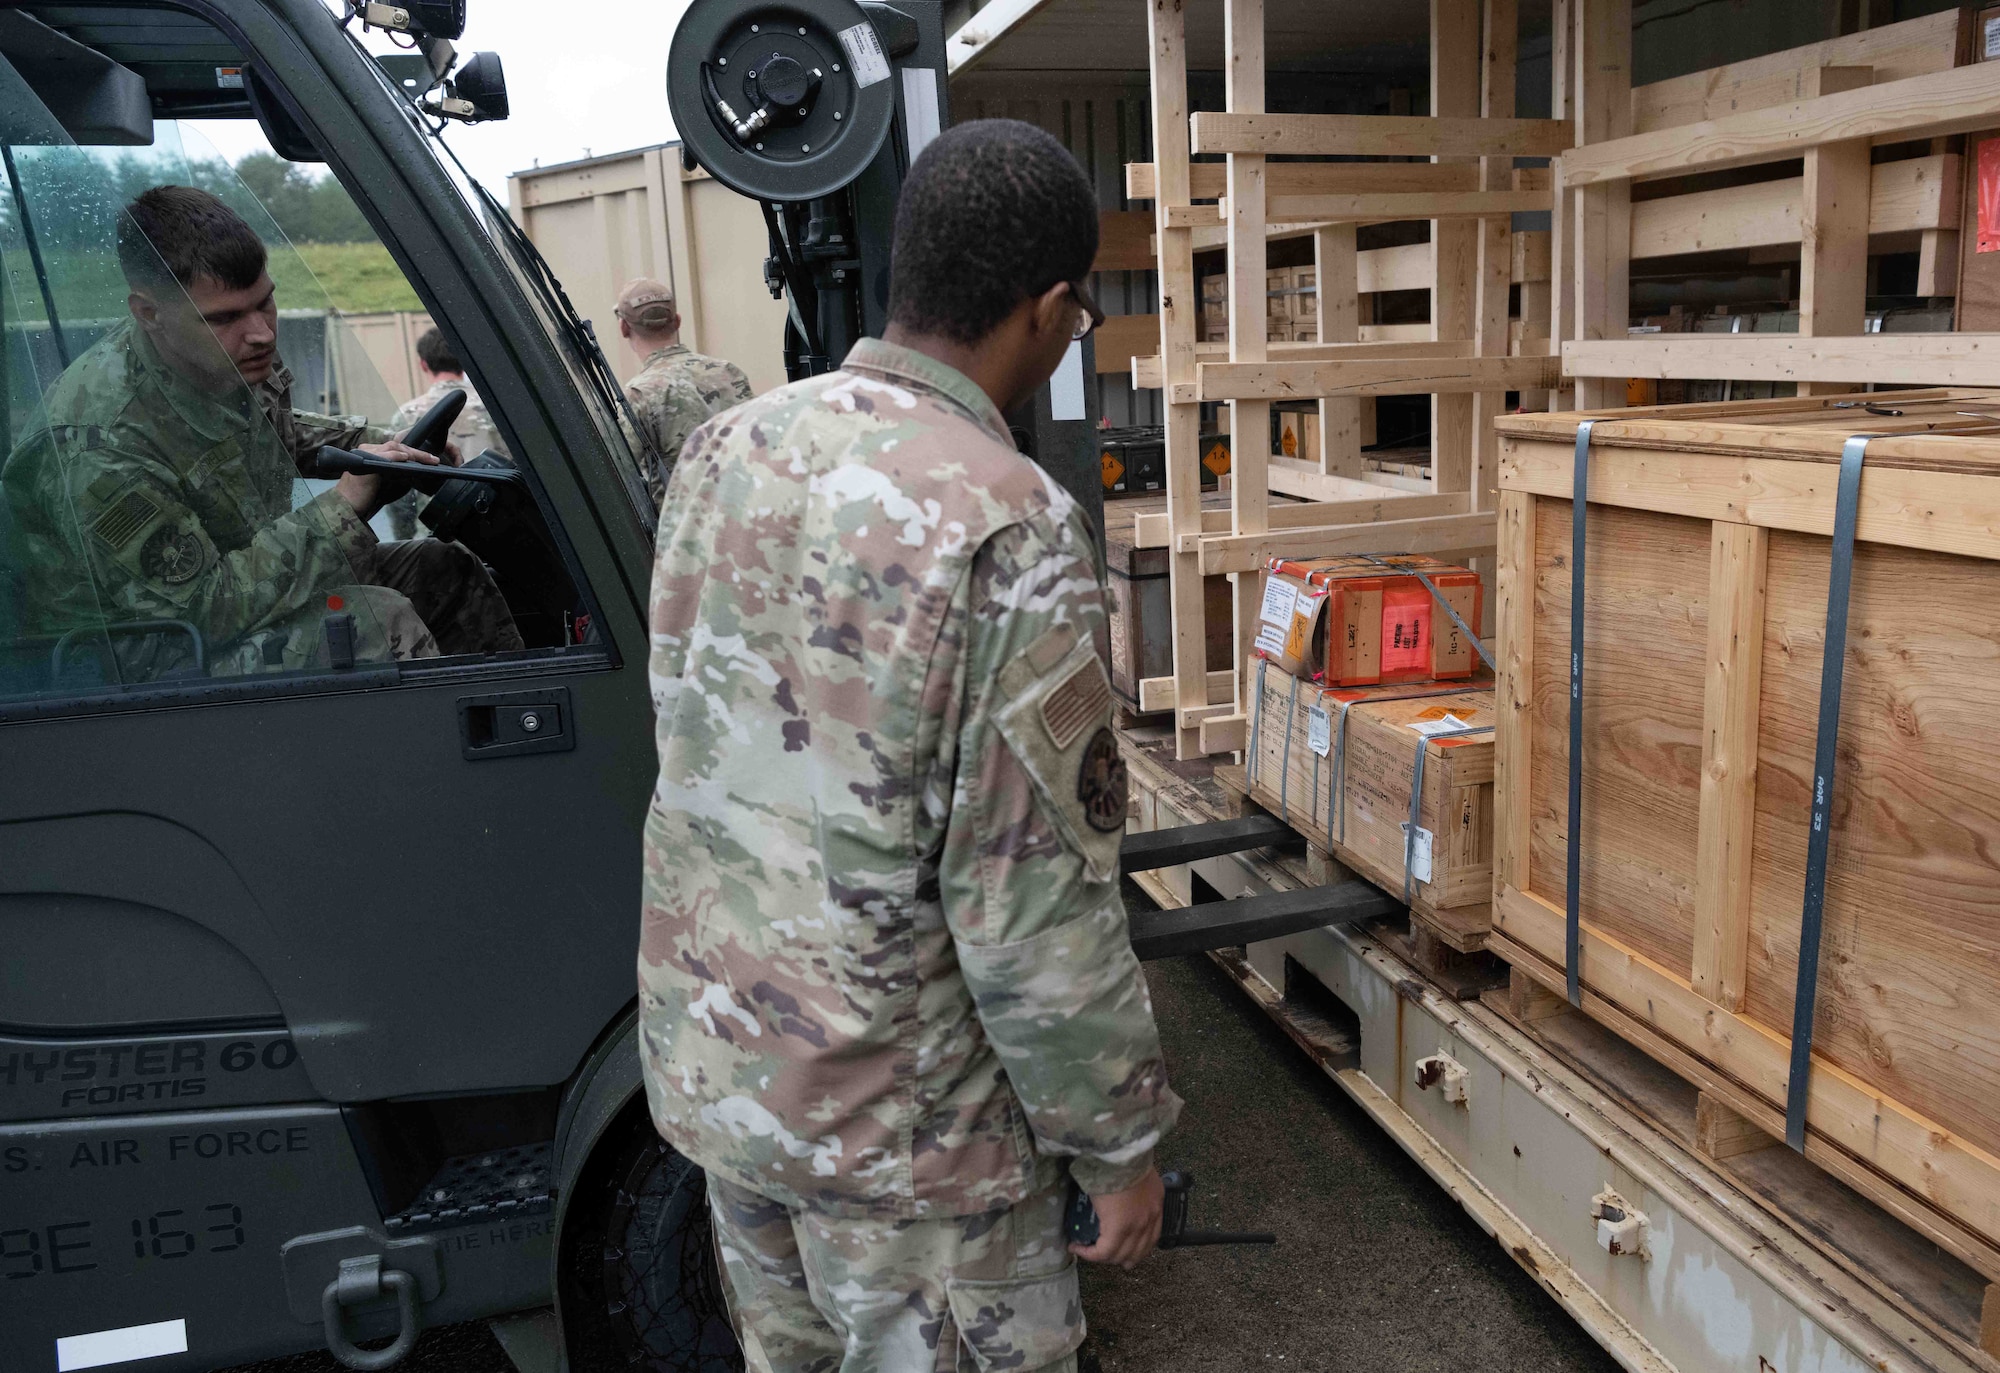 Two military members put a pallet in a shipping container. While one drives a forklift with the pallet the other guides him where to go.